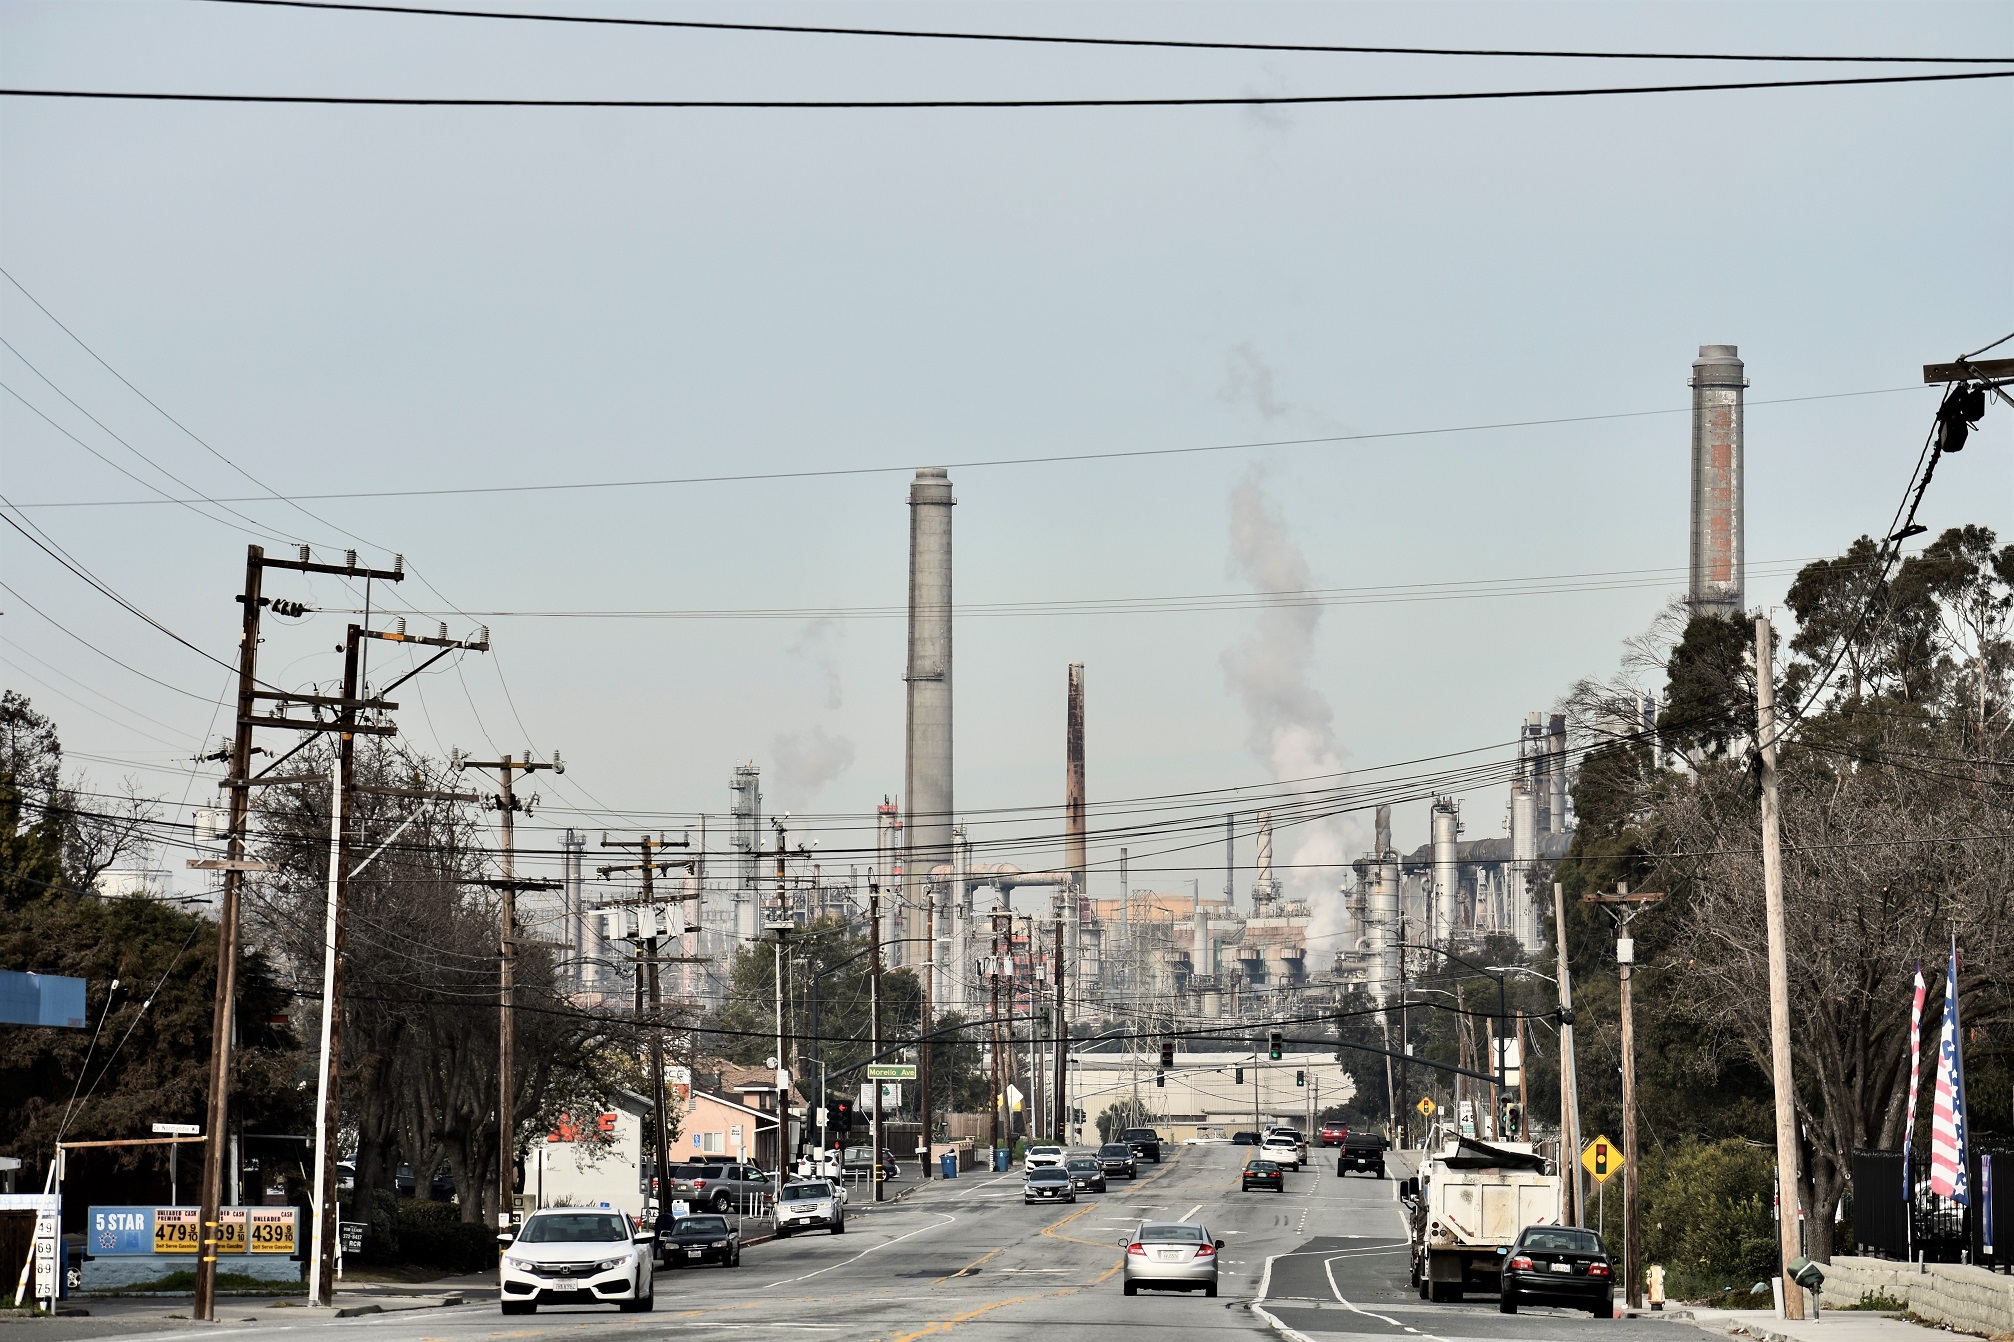 Refinery smokestacks at end of busy street